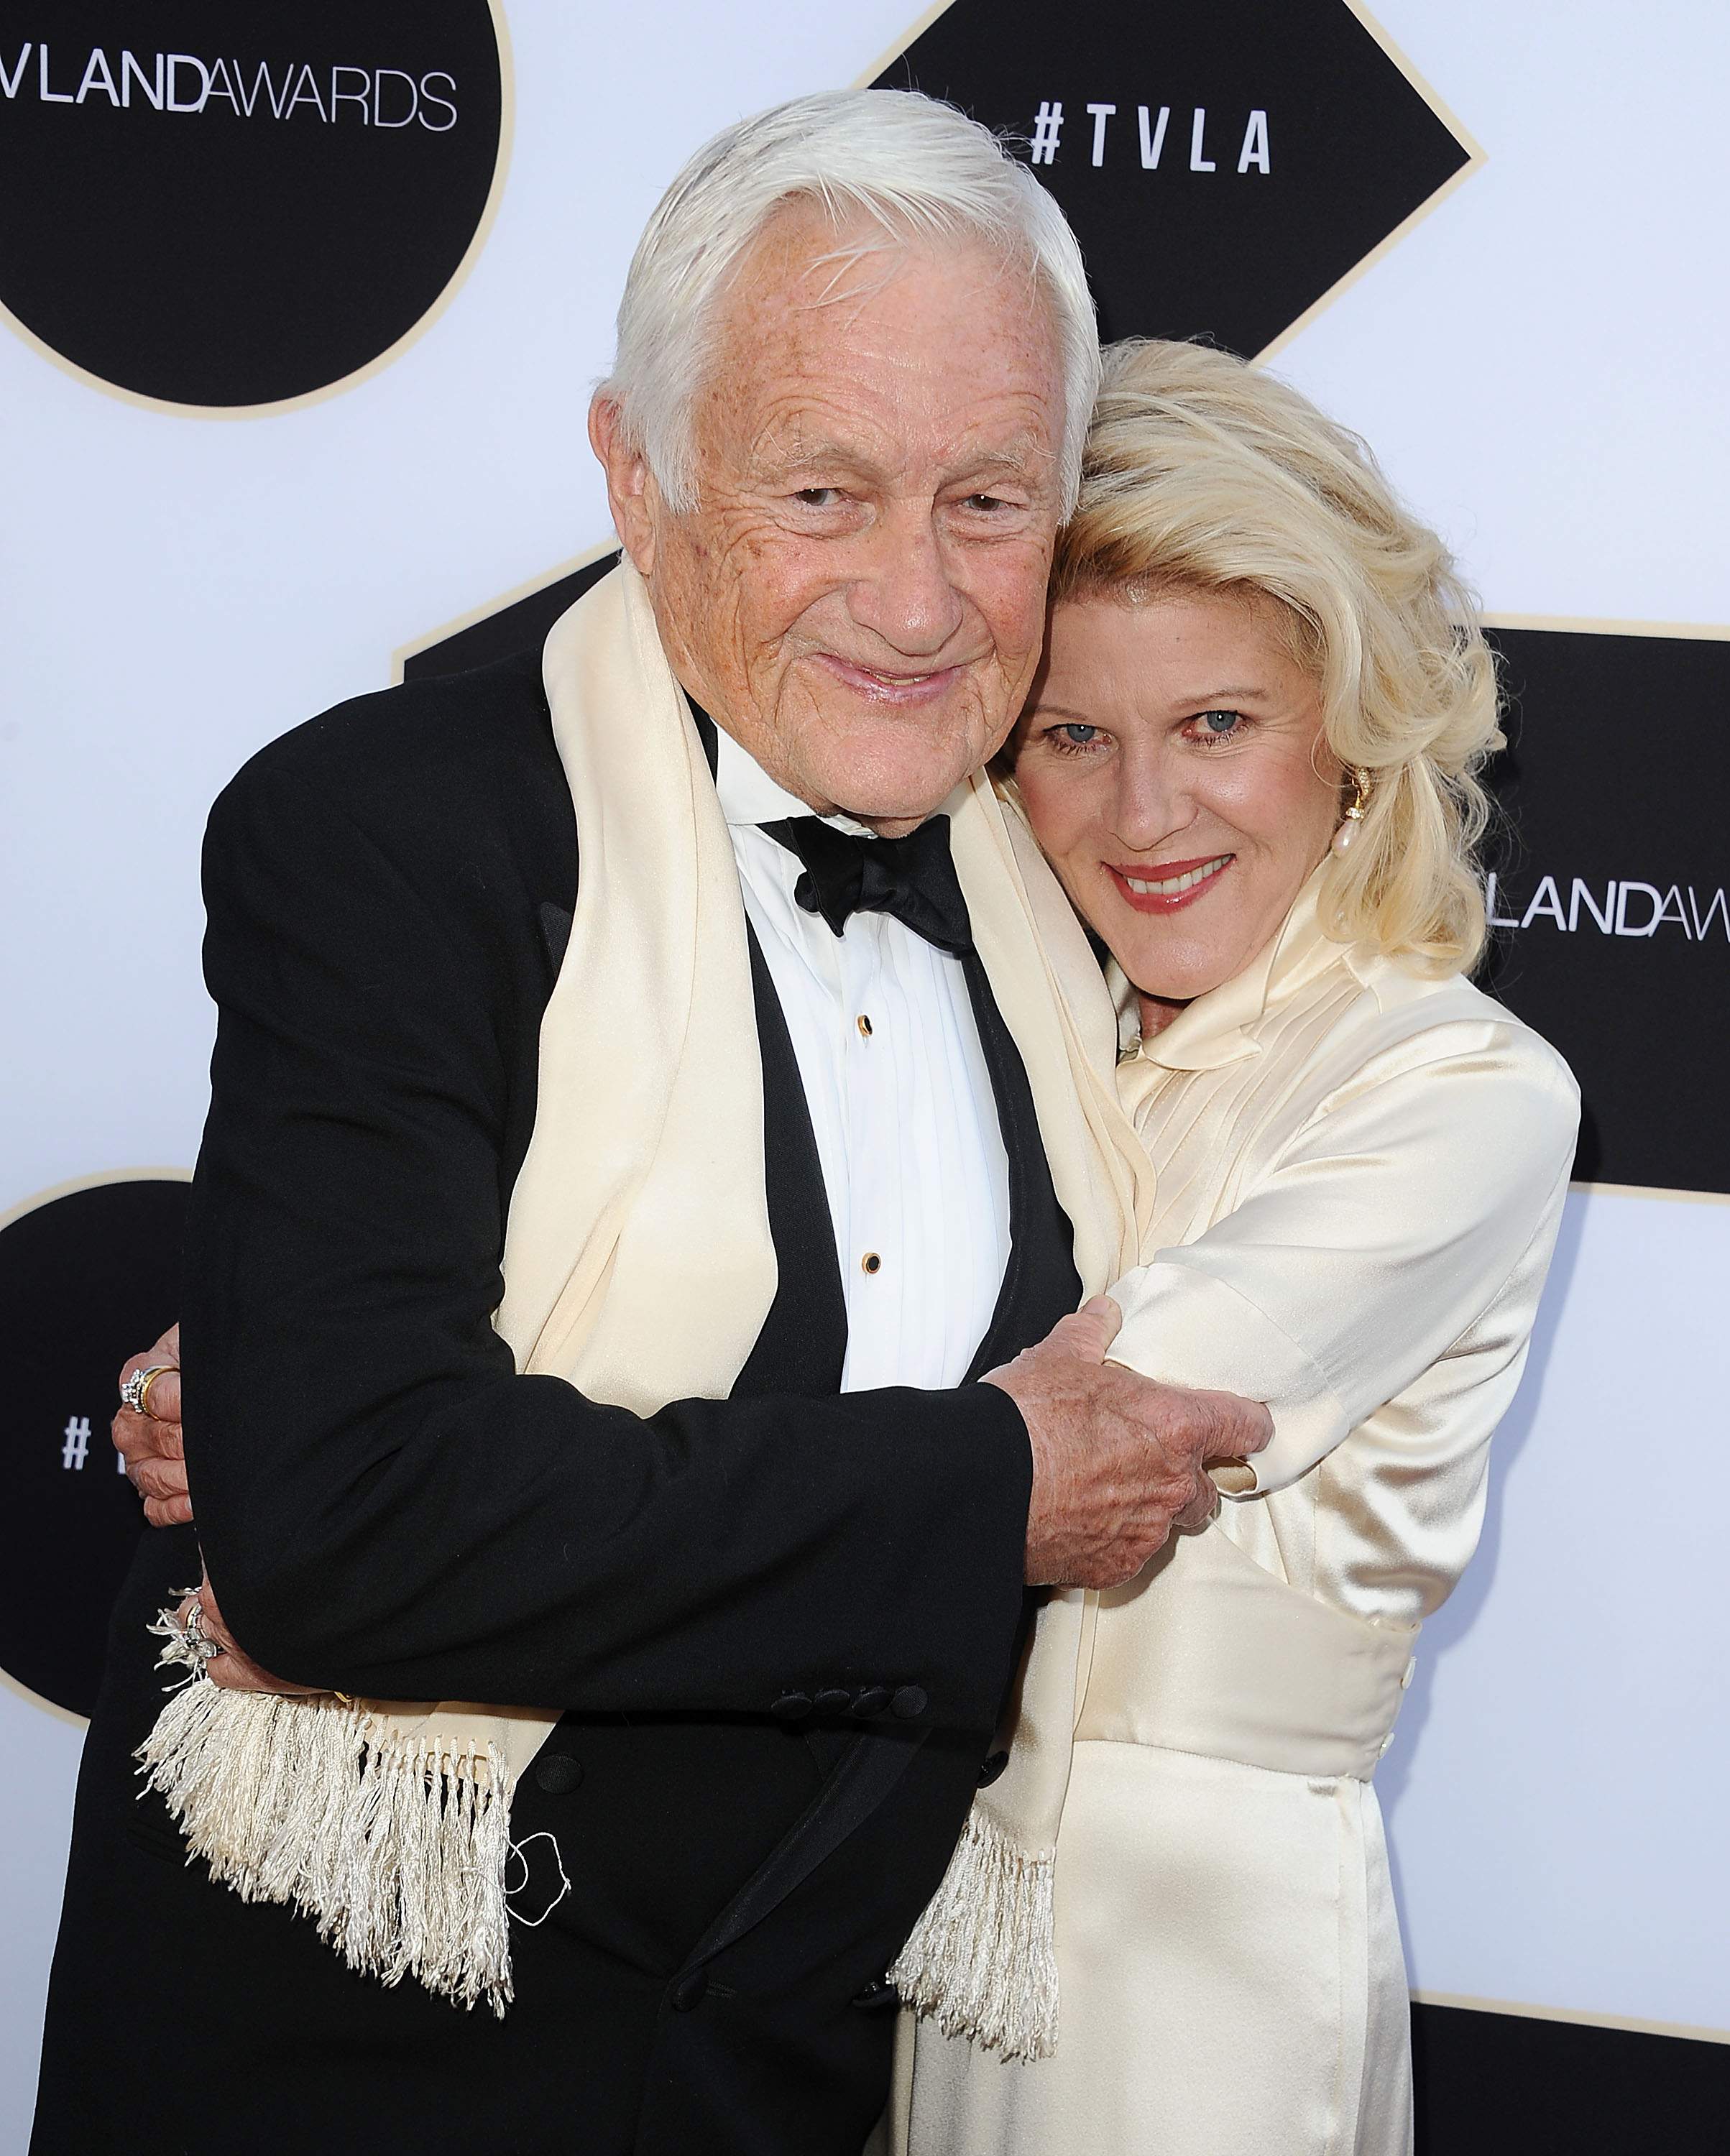 Orson Bean and Alley Mills at the TV LAND Awards on April 11, 2015, in Beverly Hills, California | Source: Getty Images